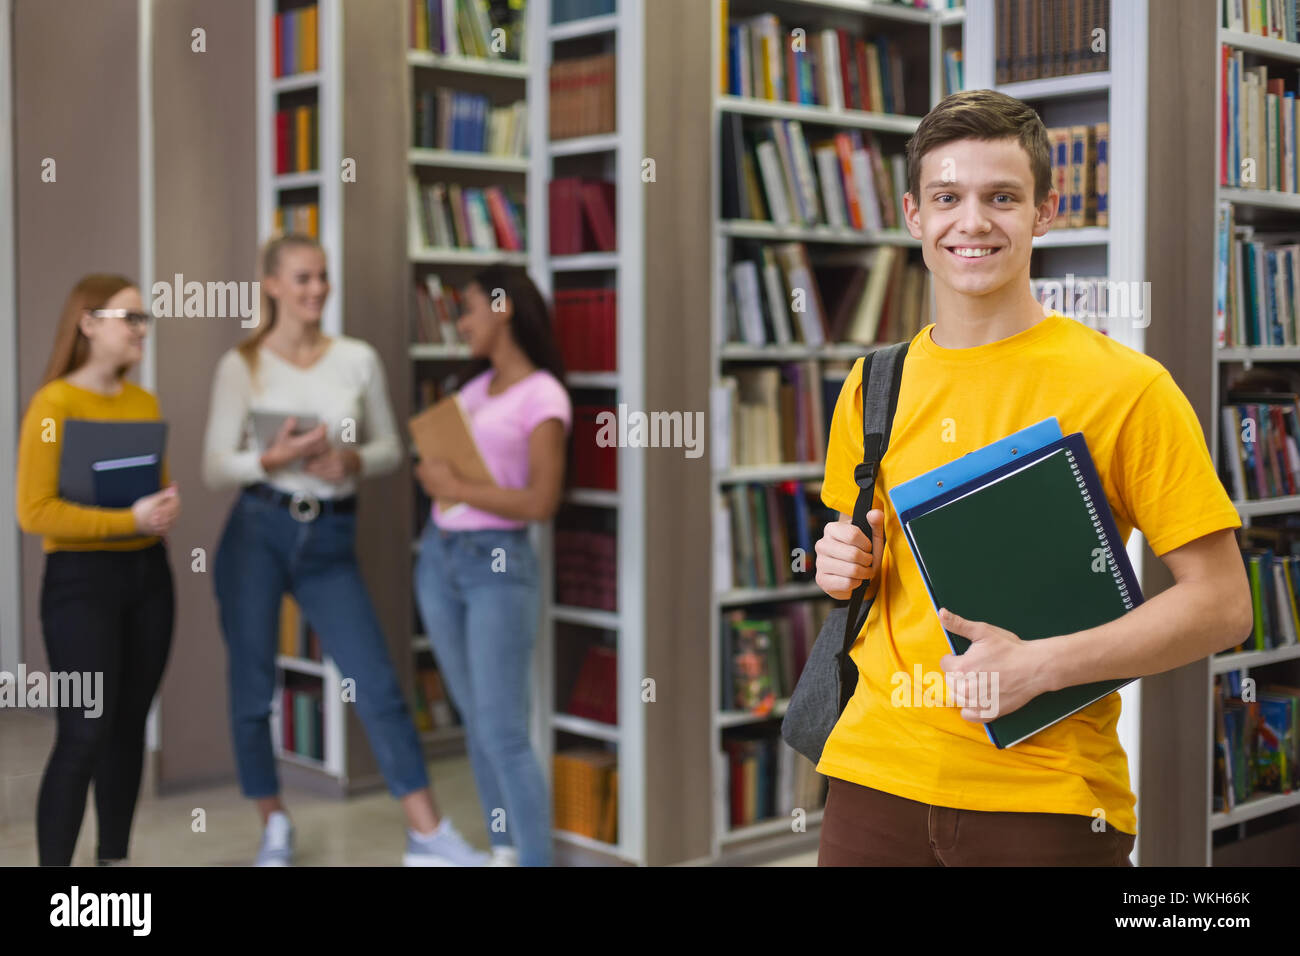 Excited guy posing next to bookshelves in library Stock Photo